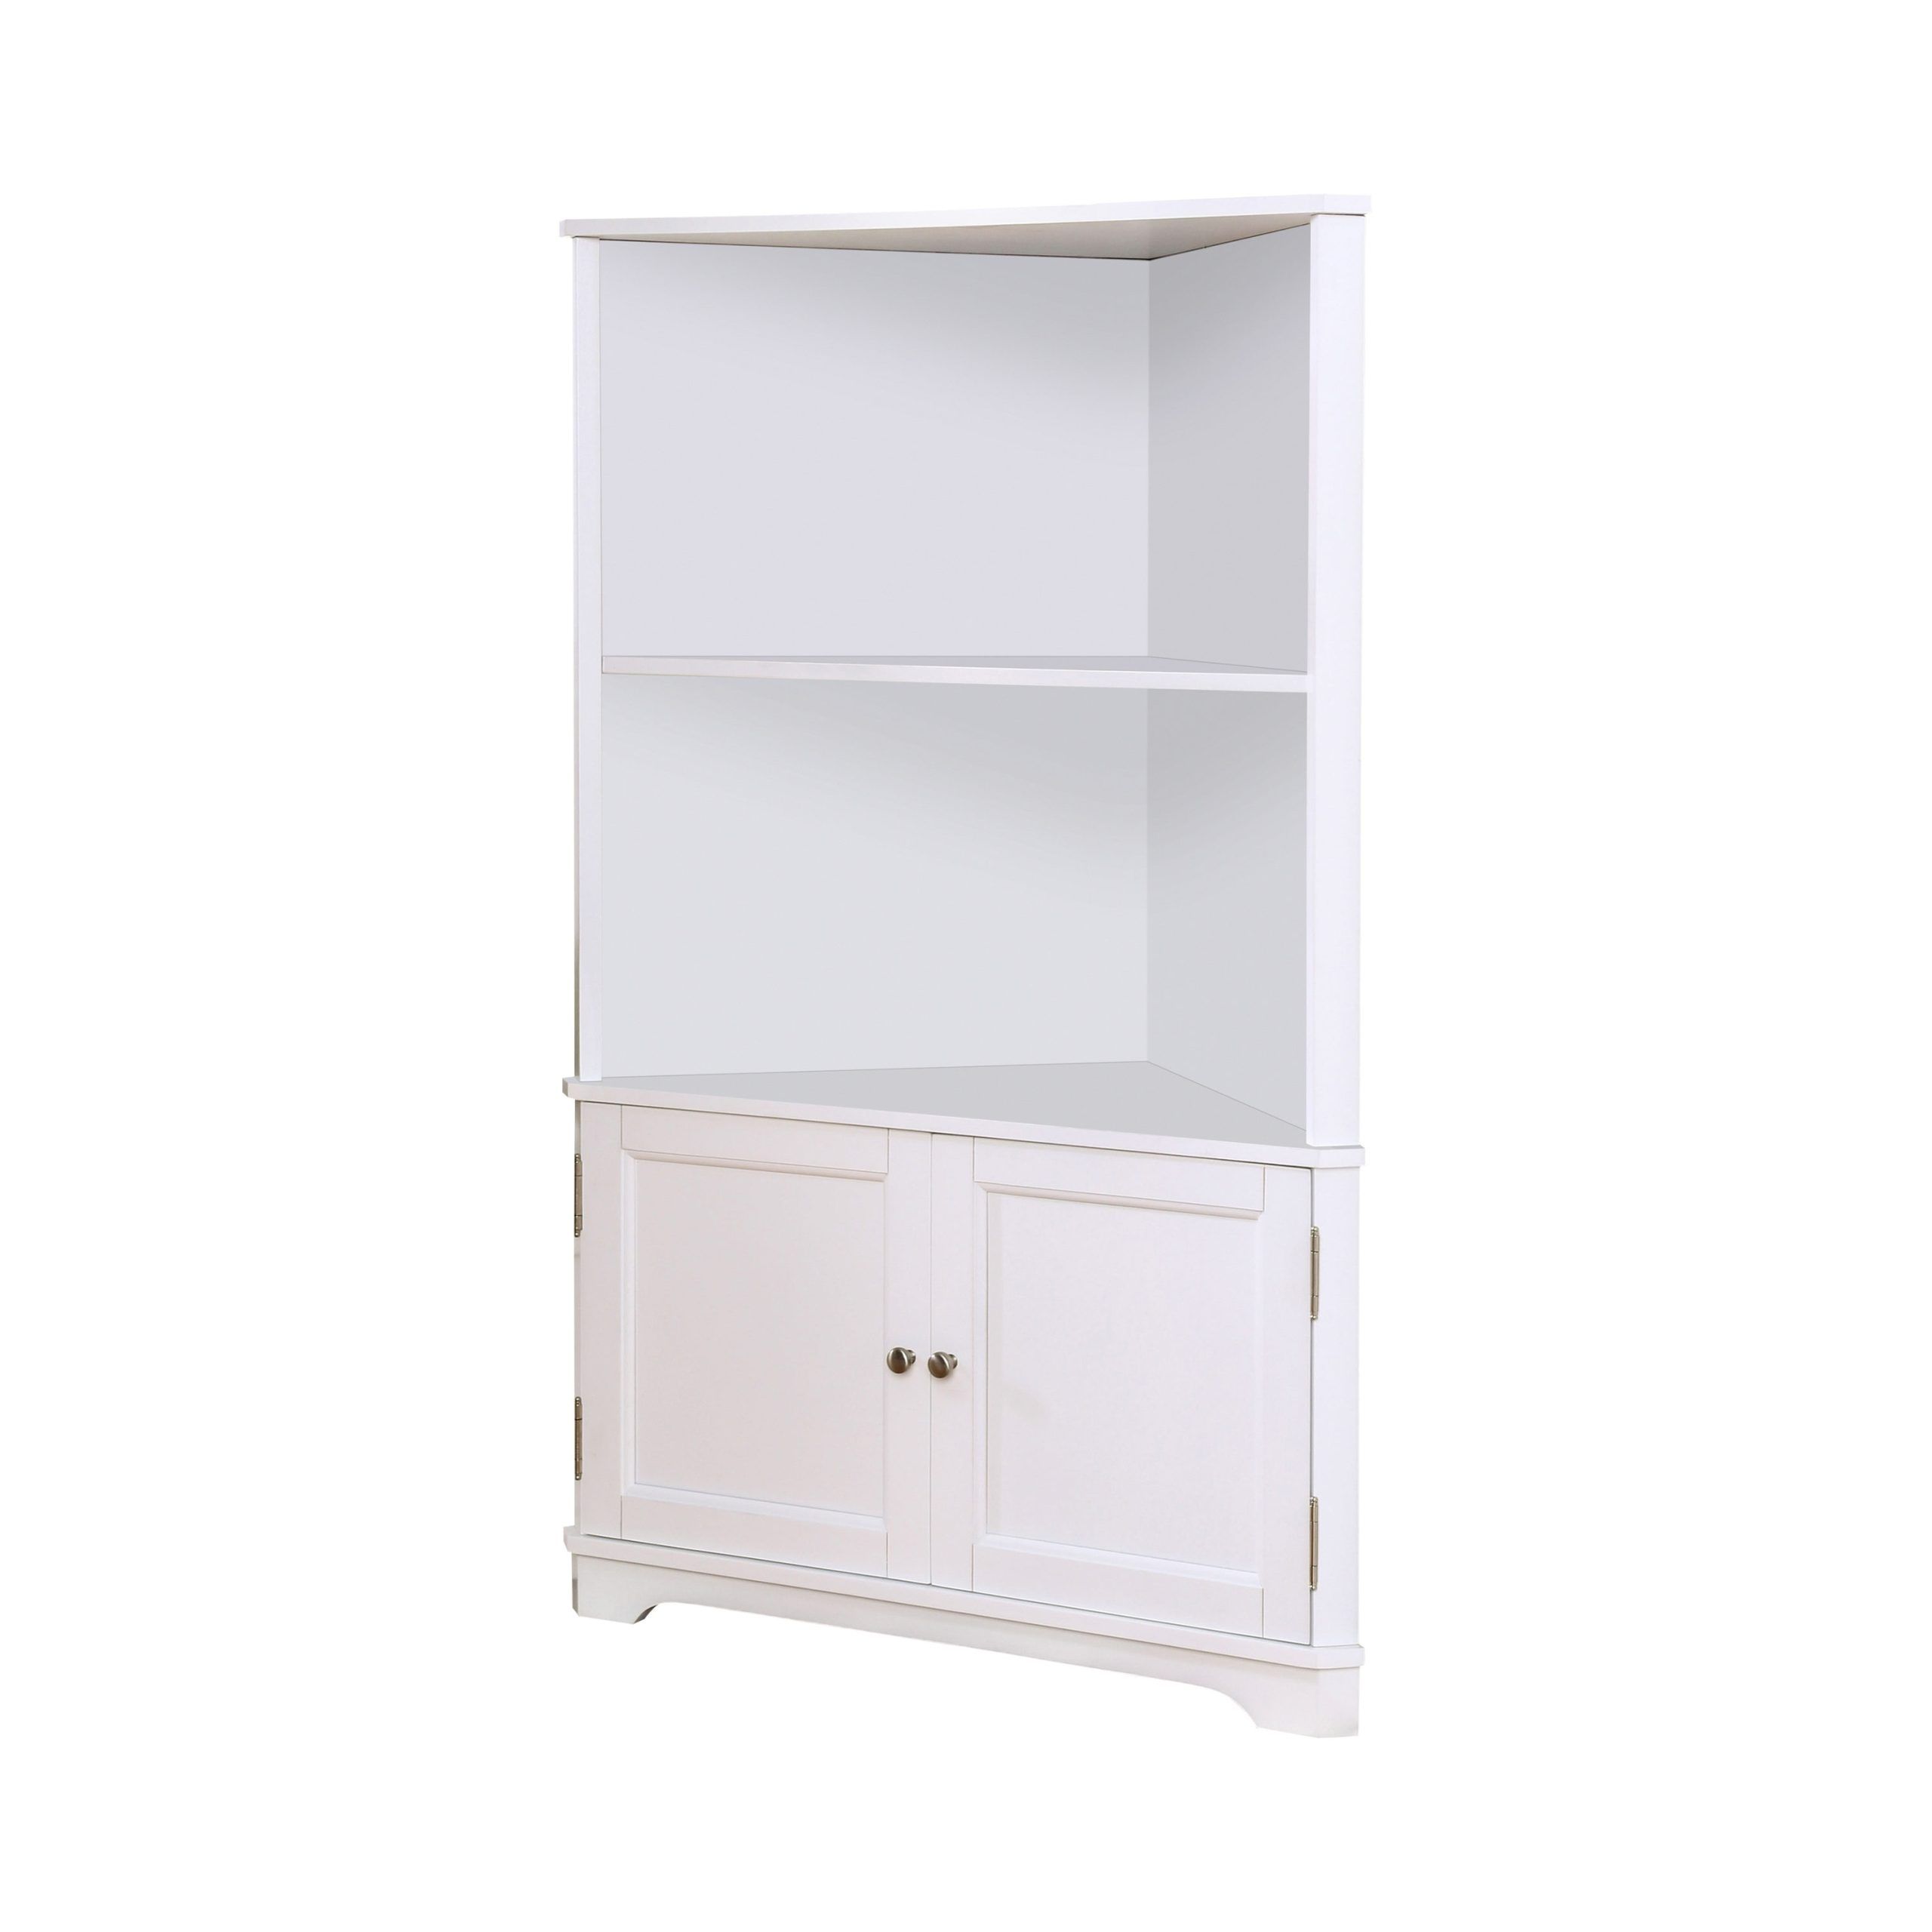 Furniture Of America Hyannis White Wood 2 Shelf Corner Bookcase With Doors  (32 In W X 50 In H X 17 In D) In The Bookcases Department At Lowes Intended For Corner Bookcases (View 14 of 15)